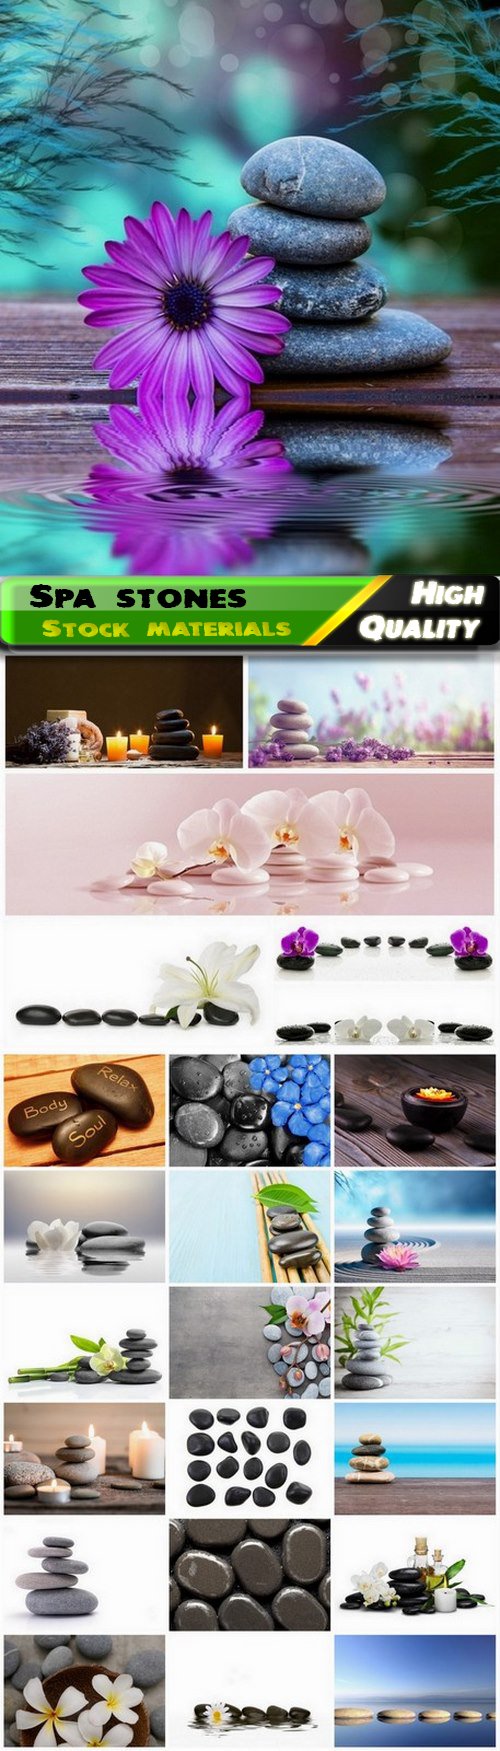 Black smooth spa stones with flower for relax massage 25 HQ Jpg